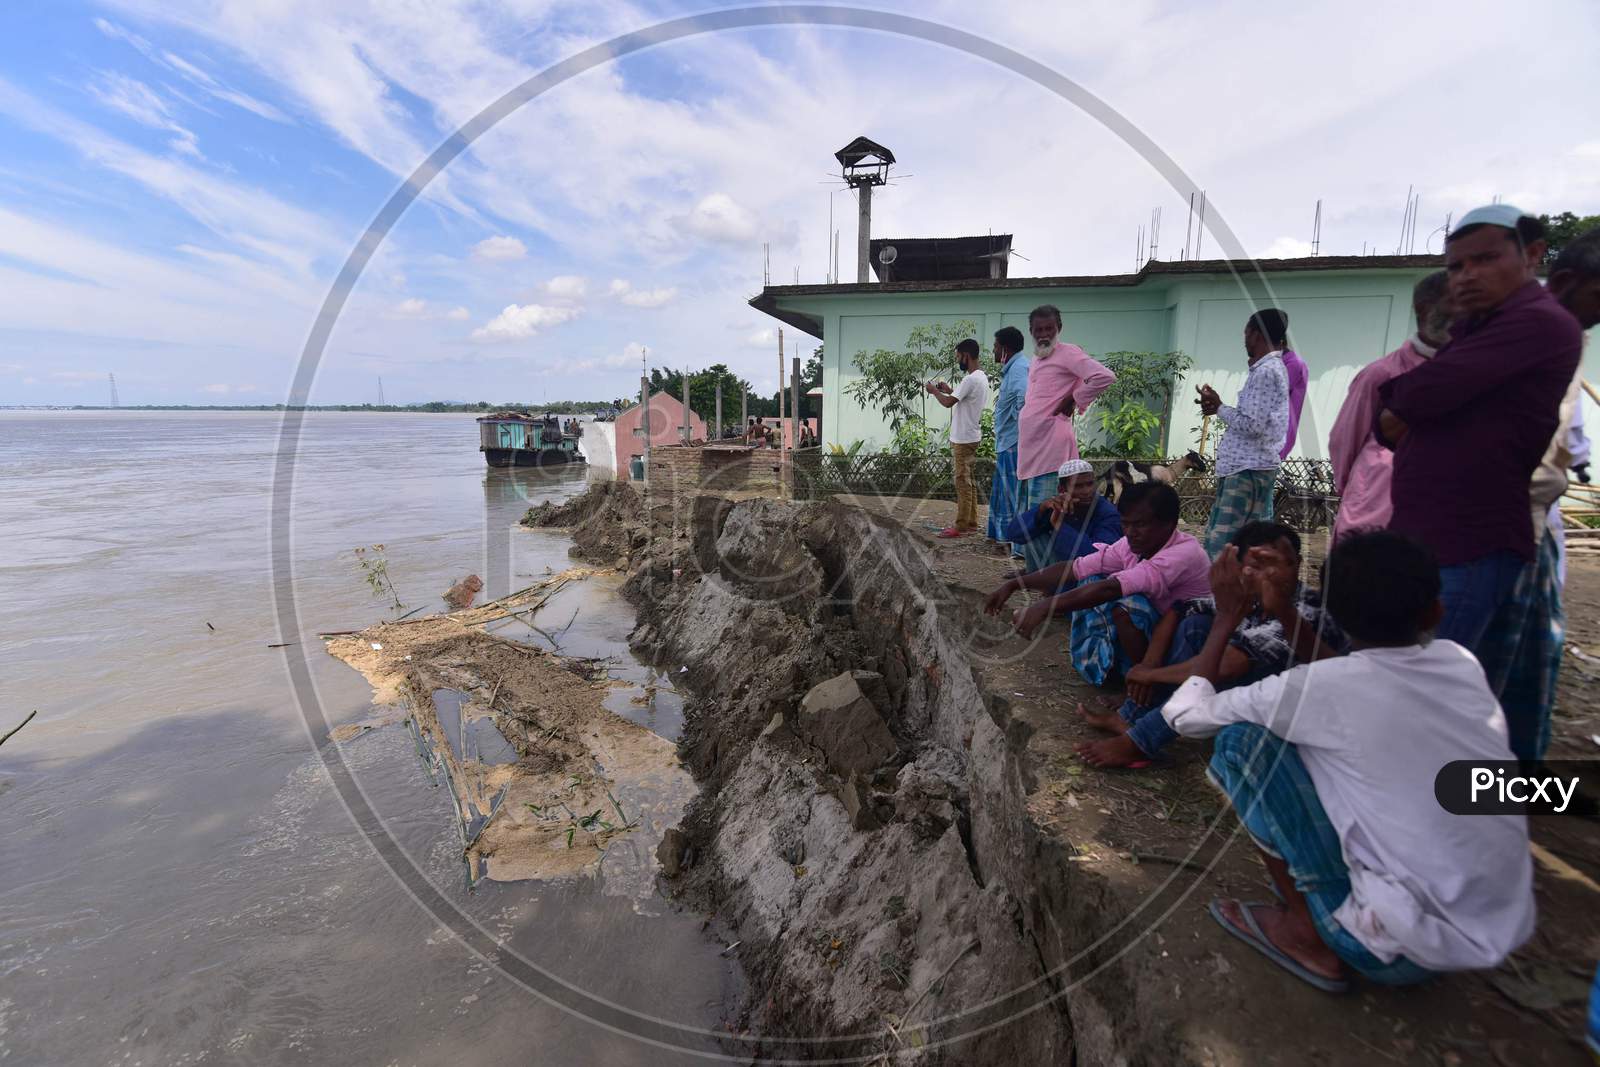 Villagers Stand Next To A School And Mosque That Collapsed On The Banks Of Brahmaputra River Owing To Soil Erosion during the floods, At Bhurbandha Village In Nagaon District Of Assam On July 25,2020